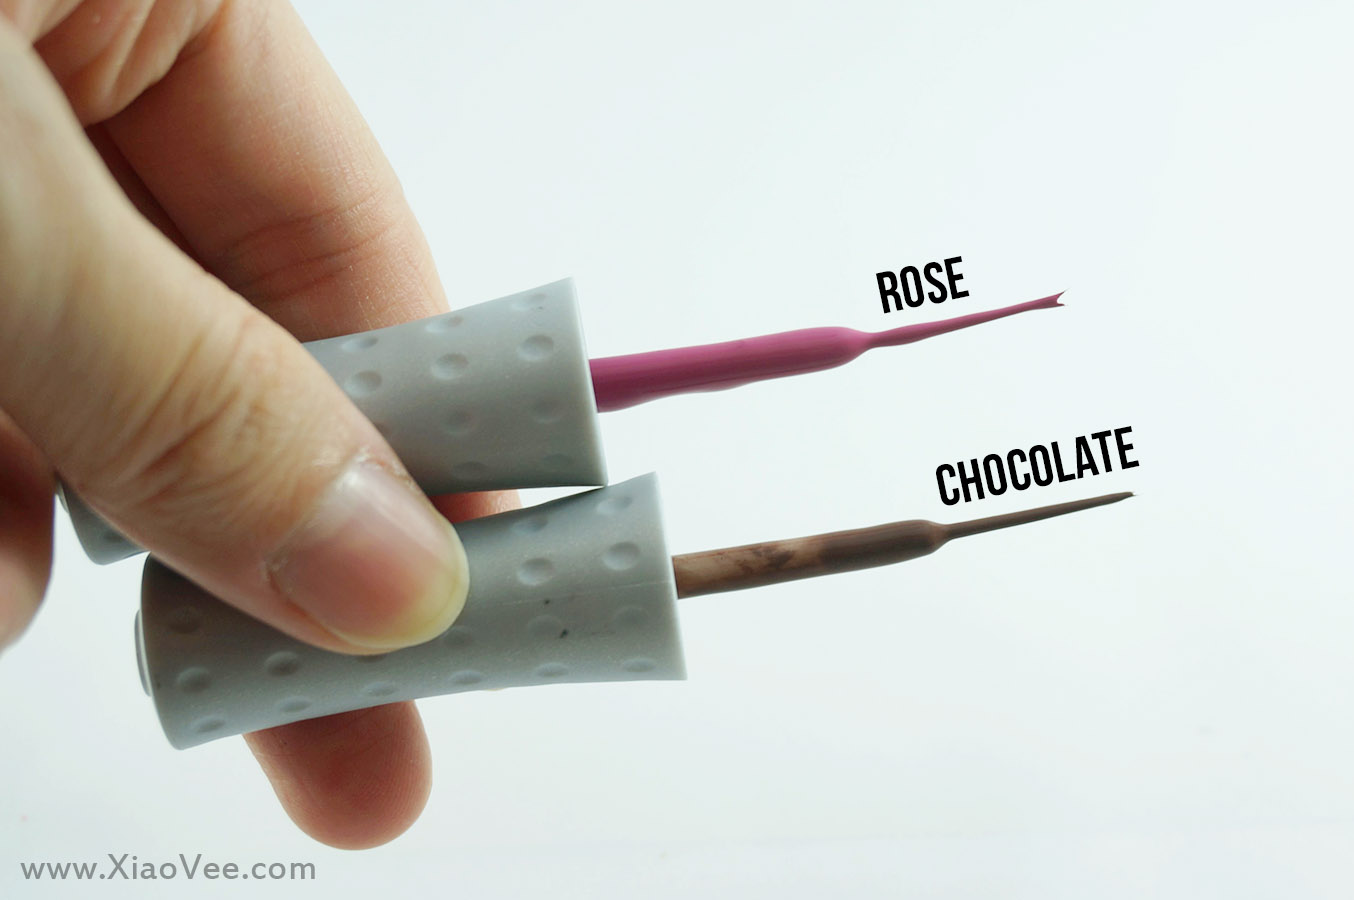 Orly Instant Artist Rose, Orly Instant Artist Chocolate review swatch